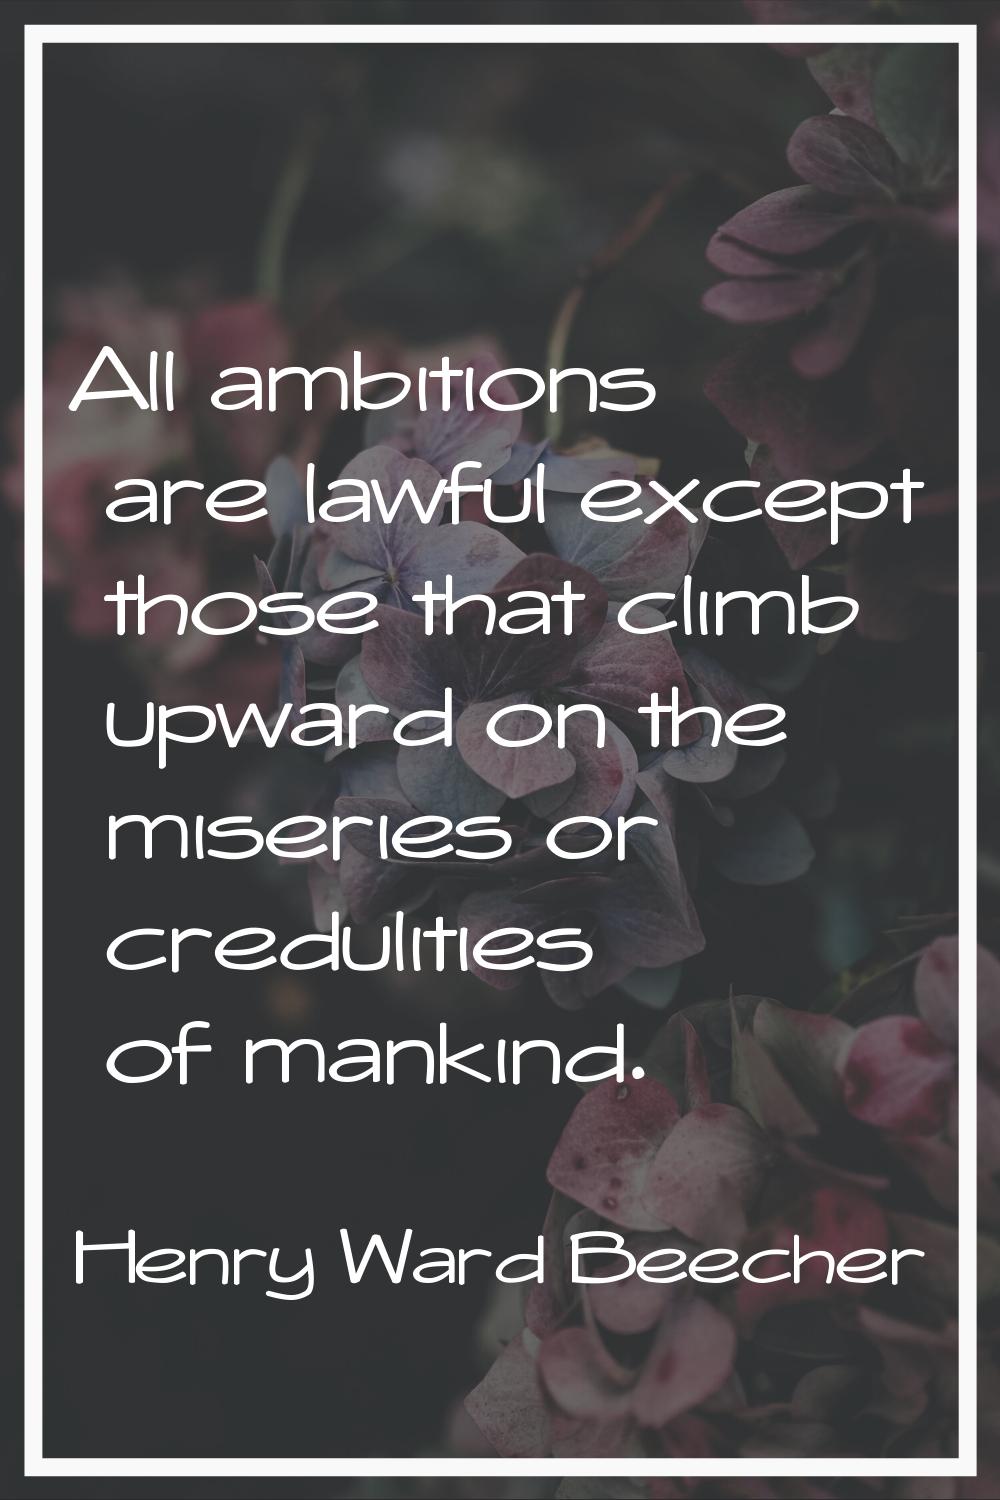 All ambitions are lawful except those that climb upward on the miseries or credulities of mankind.